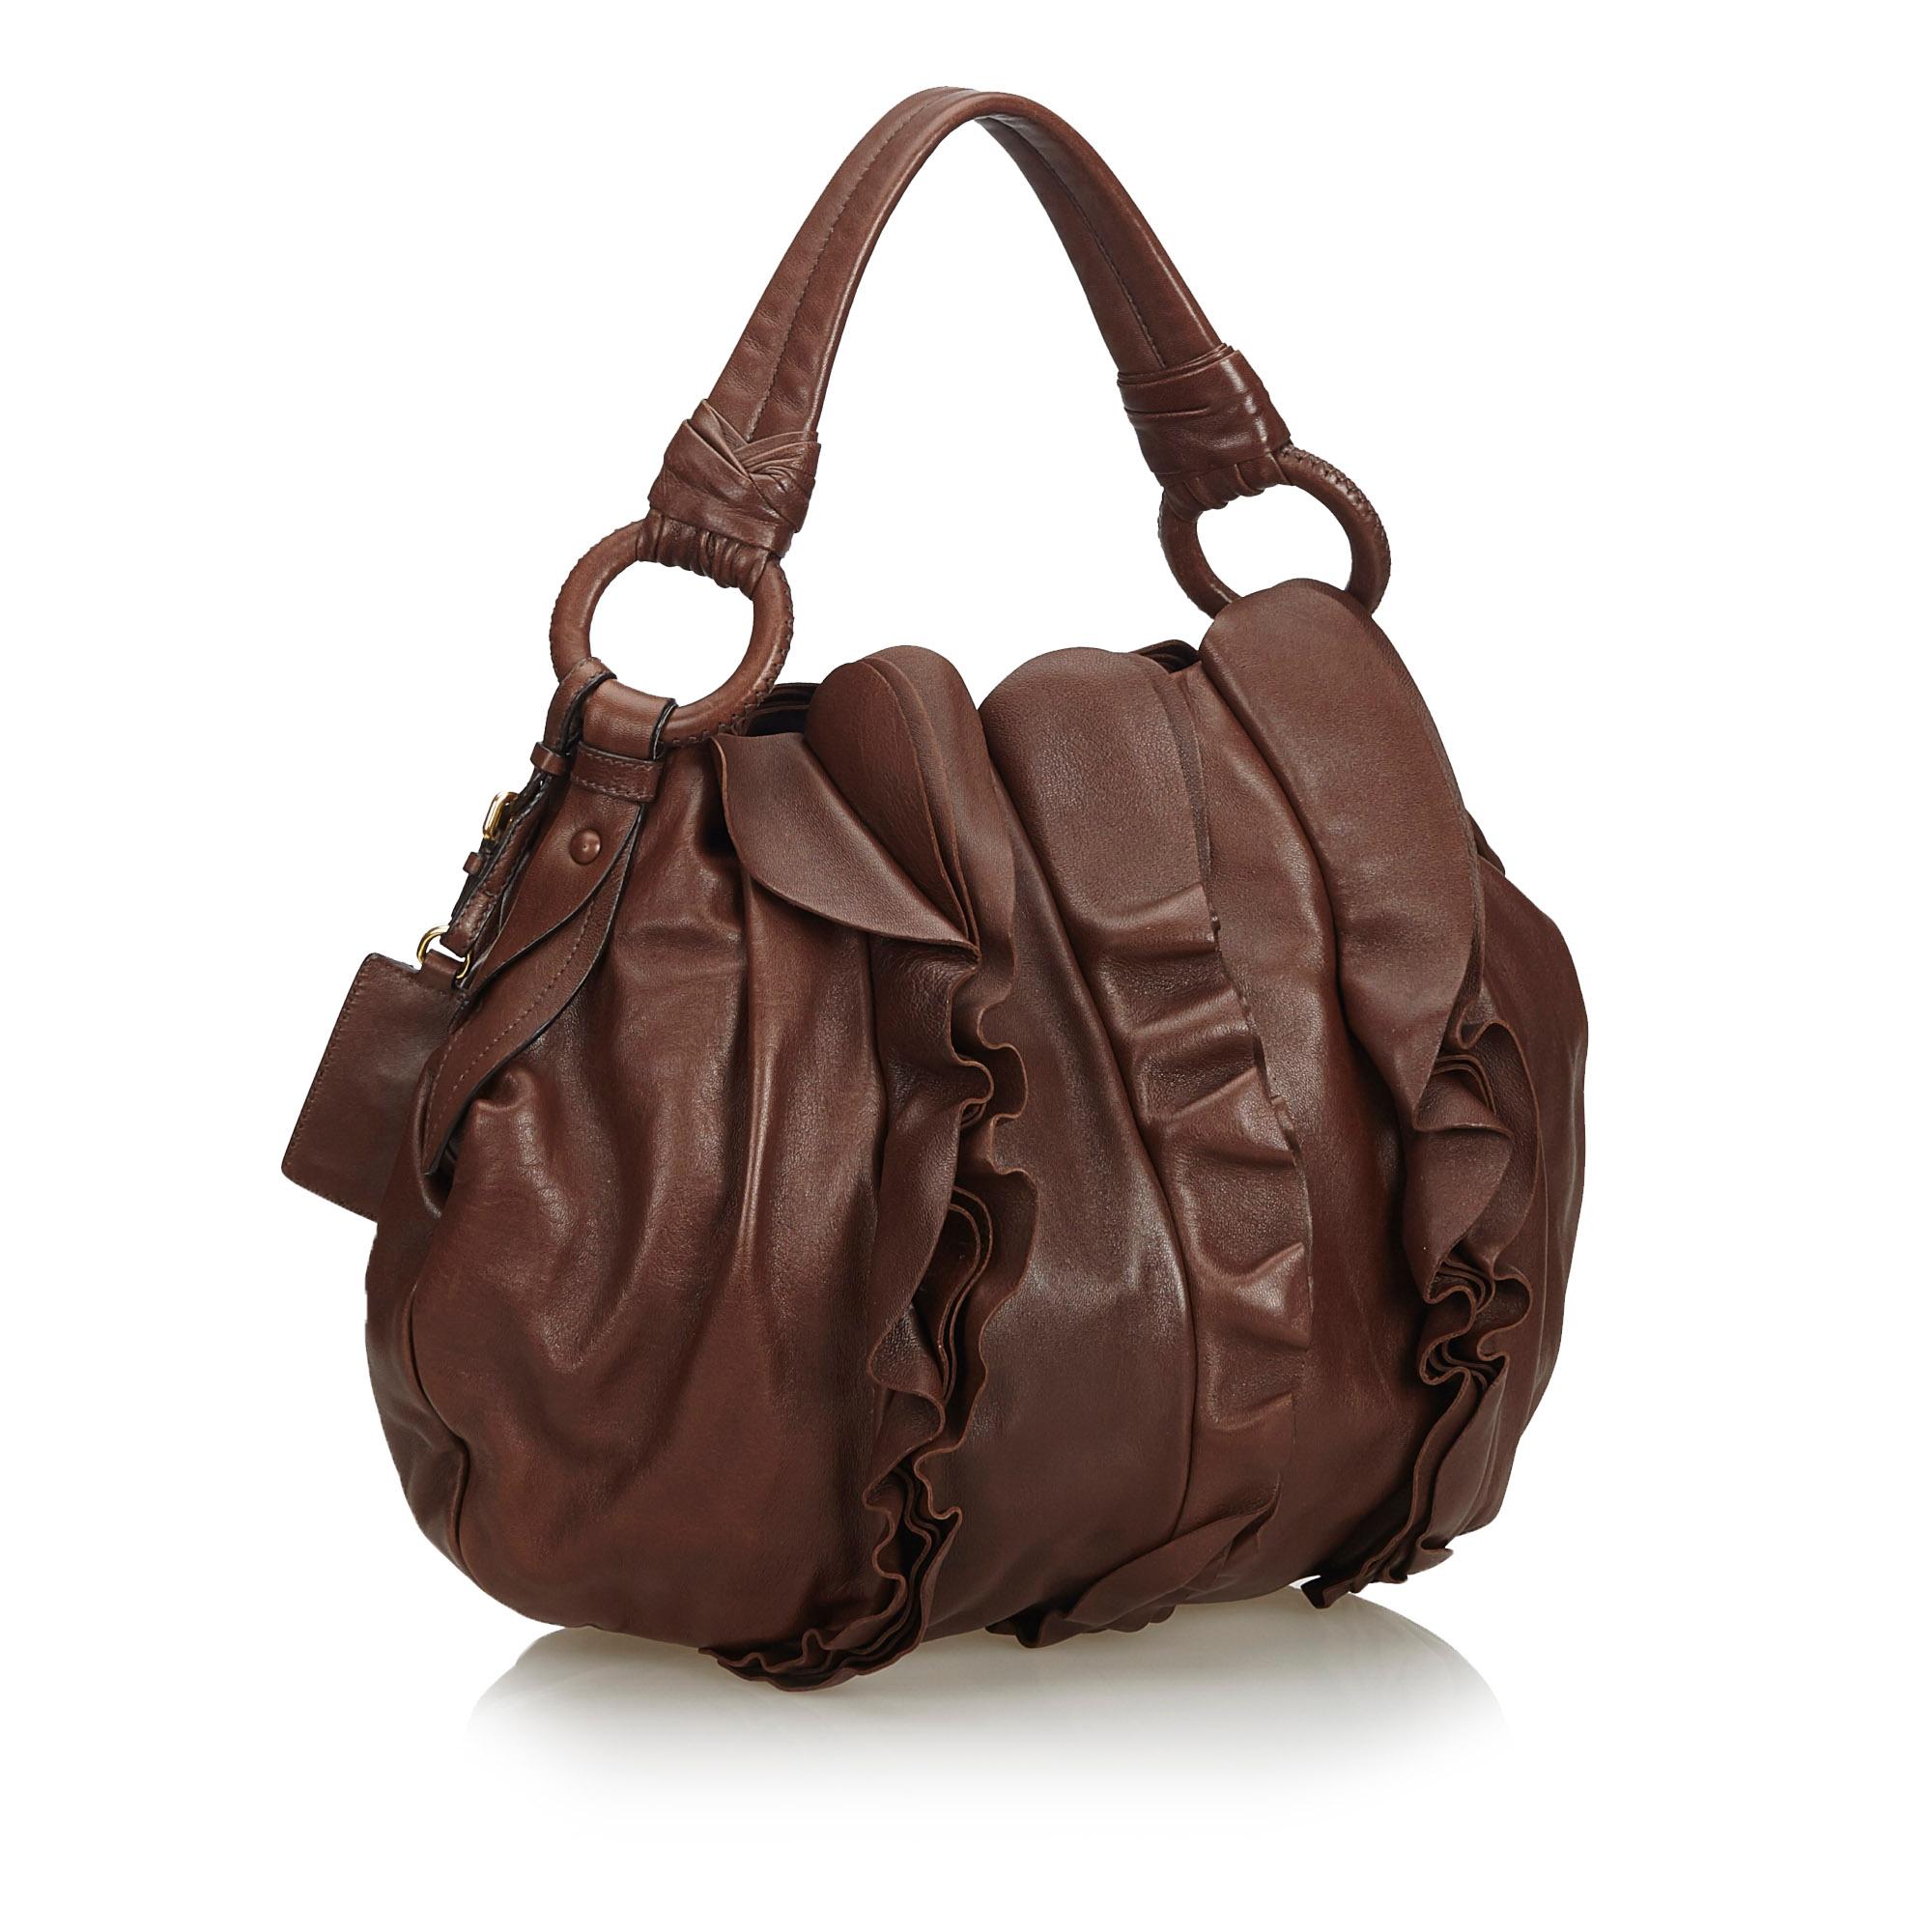 This hobo bag features a ruffled leather body, a flat leather shoulder strap, an open top with a magnetic snap closure, and interior zip and slip pockets. It carries as B+ condition rating.

Inclusions: 
Dust Bag

Dimensions:
Length: 33.00 cm
Width: